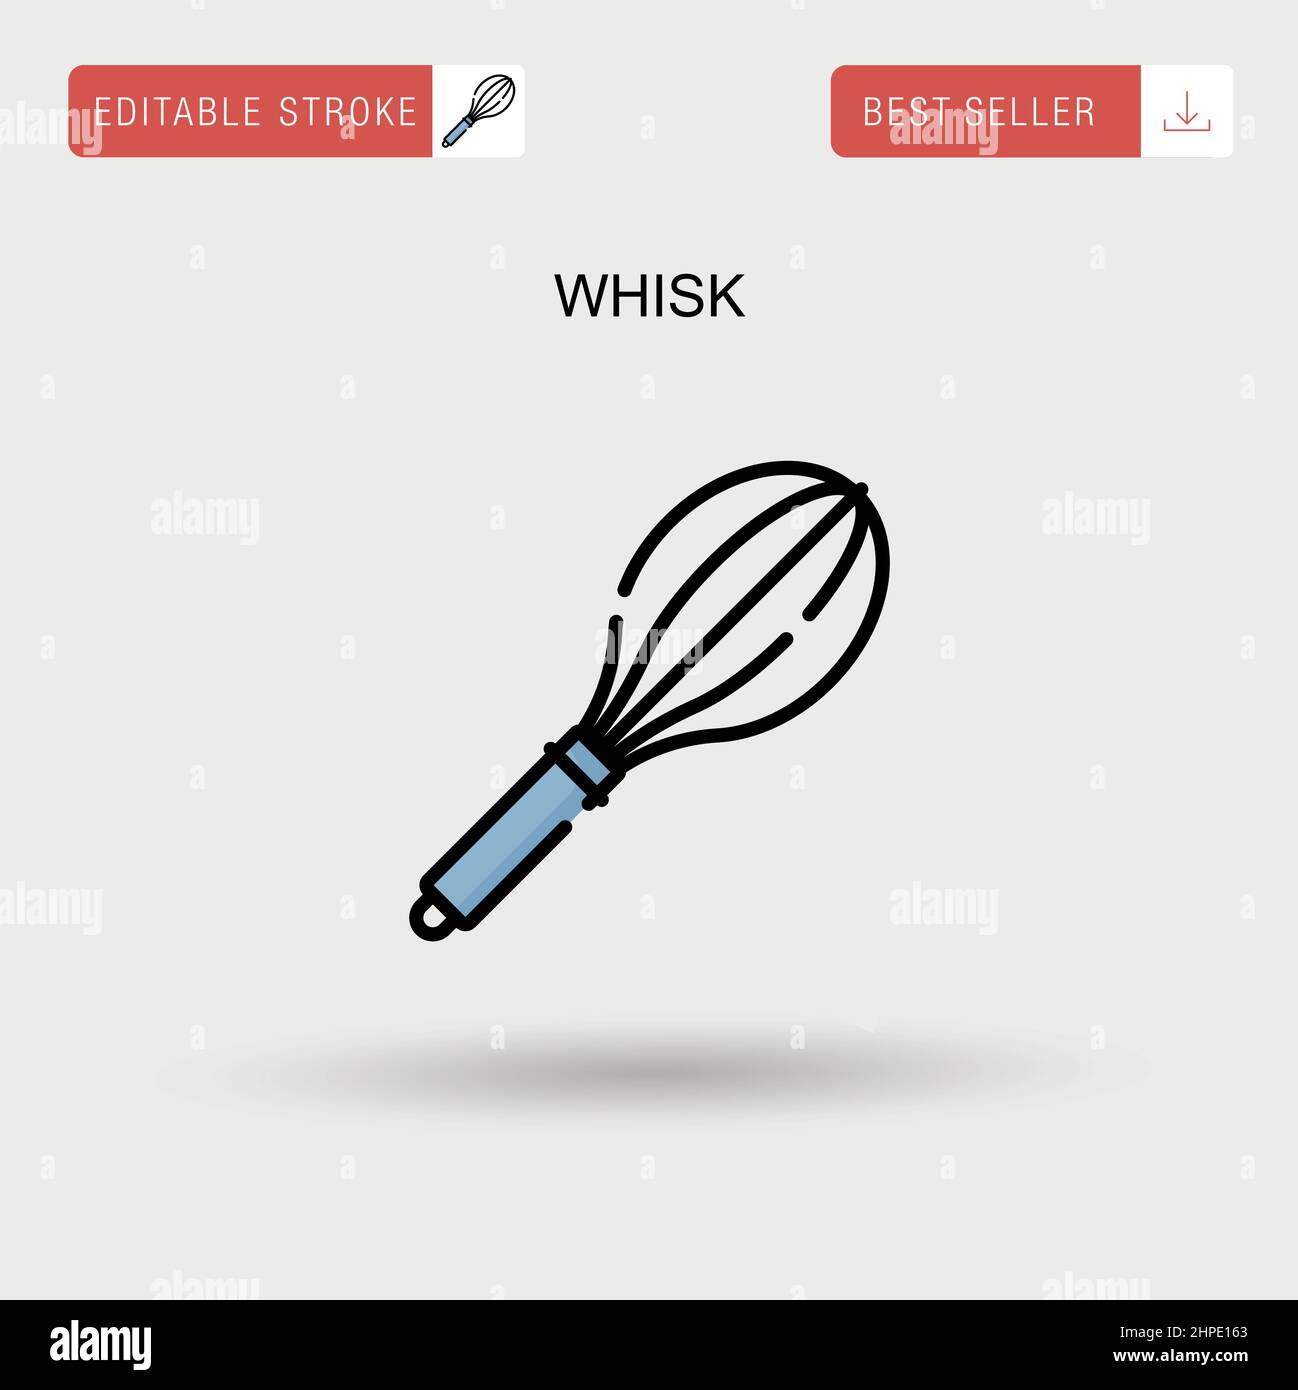 https://c8.alamy.com/comp/2HPE163/whisk-simple-vector-icon-2HPE163.jpg